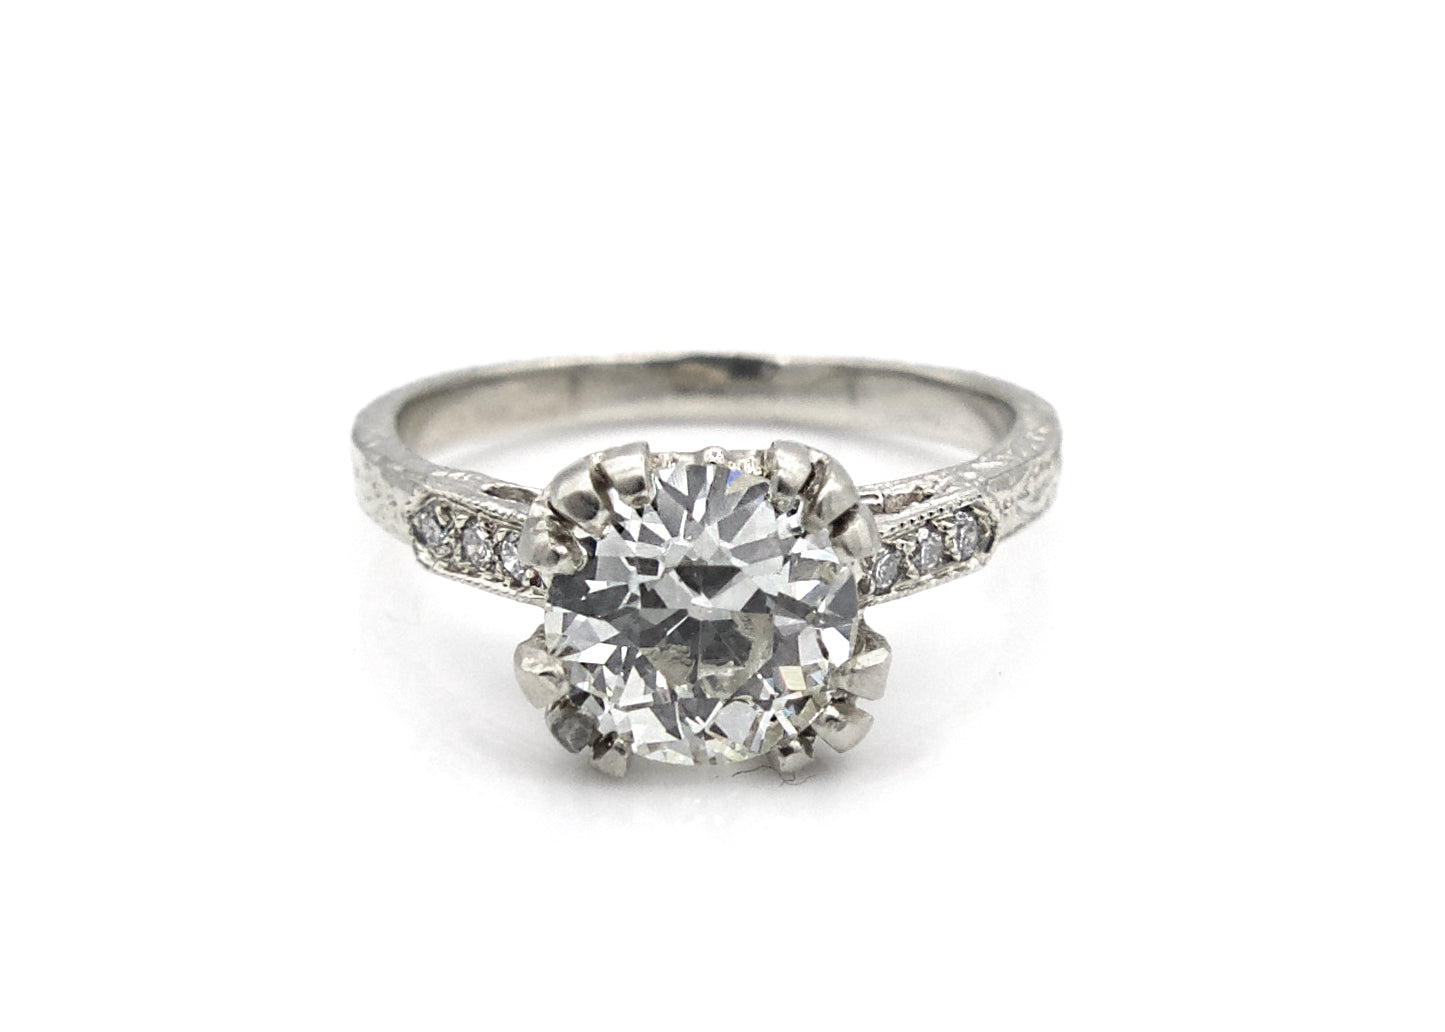 Antique-Style 3 Carat Diamond and White Gold Engagement Ring